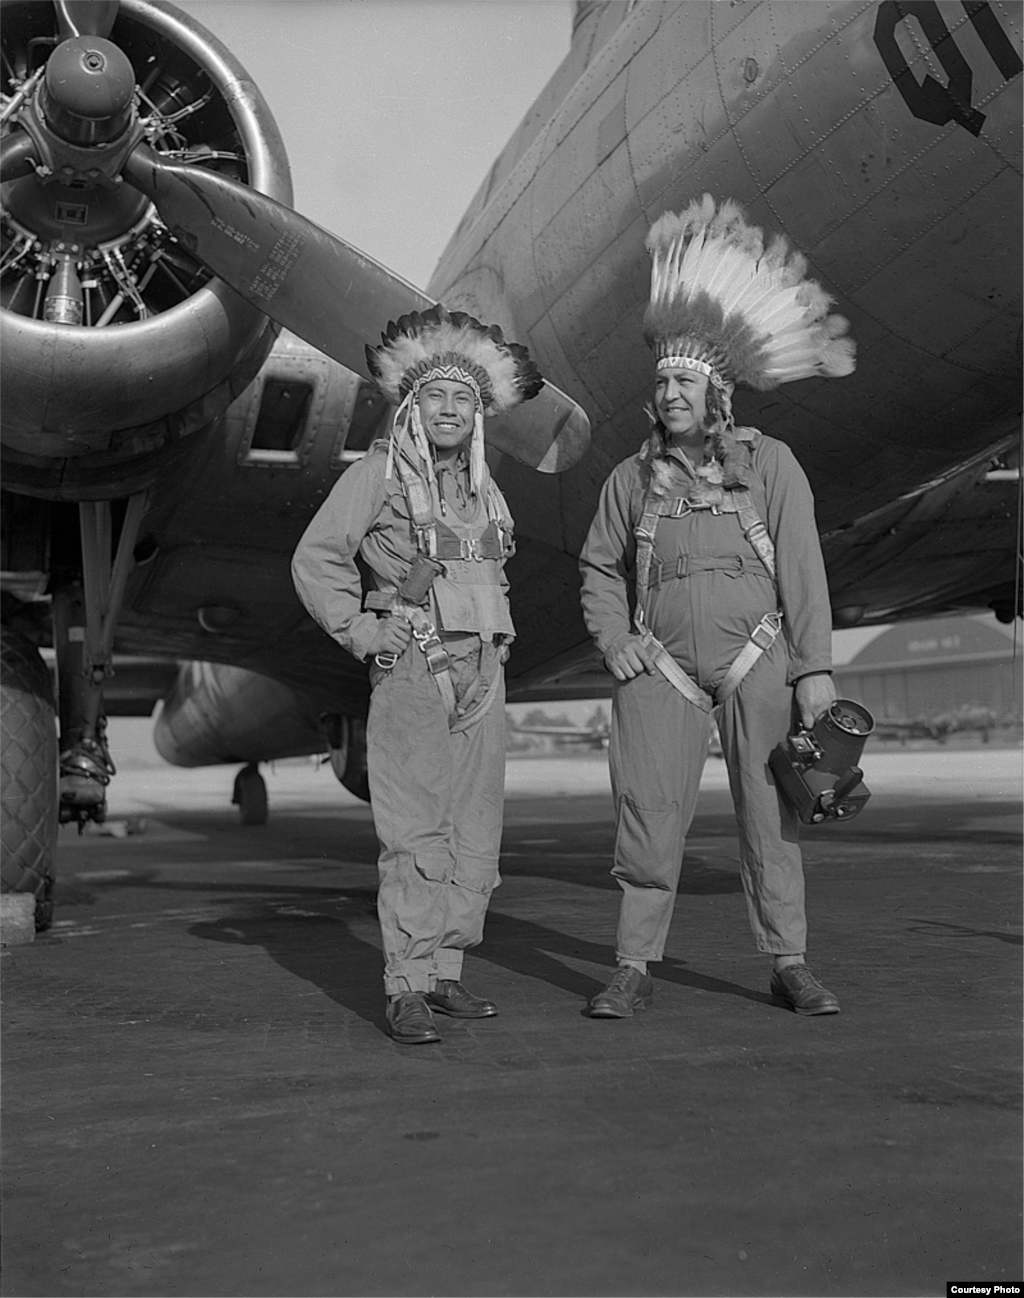 Gus Palmer (Kiowa, at left), side gunner, and Horace Poolaw (Kiowa), aerial photographer, in front of a B-17 Flying Fortress. MacDill Field, Tampa, Florida, ca. 1944. 45UFL14. © 2014 Estate of Horace Poolaw. Reprinted with permission.